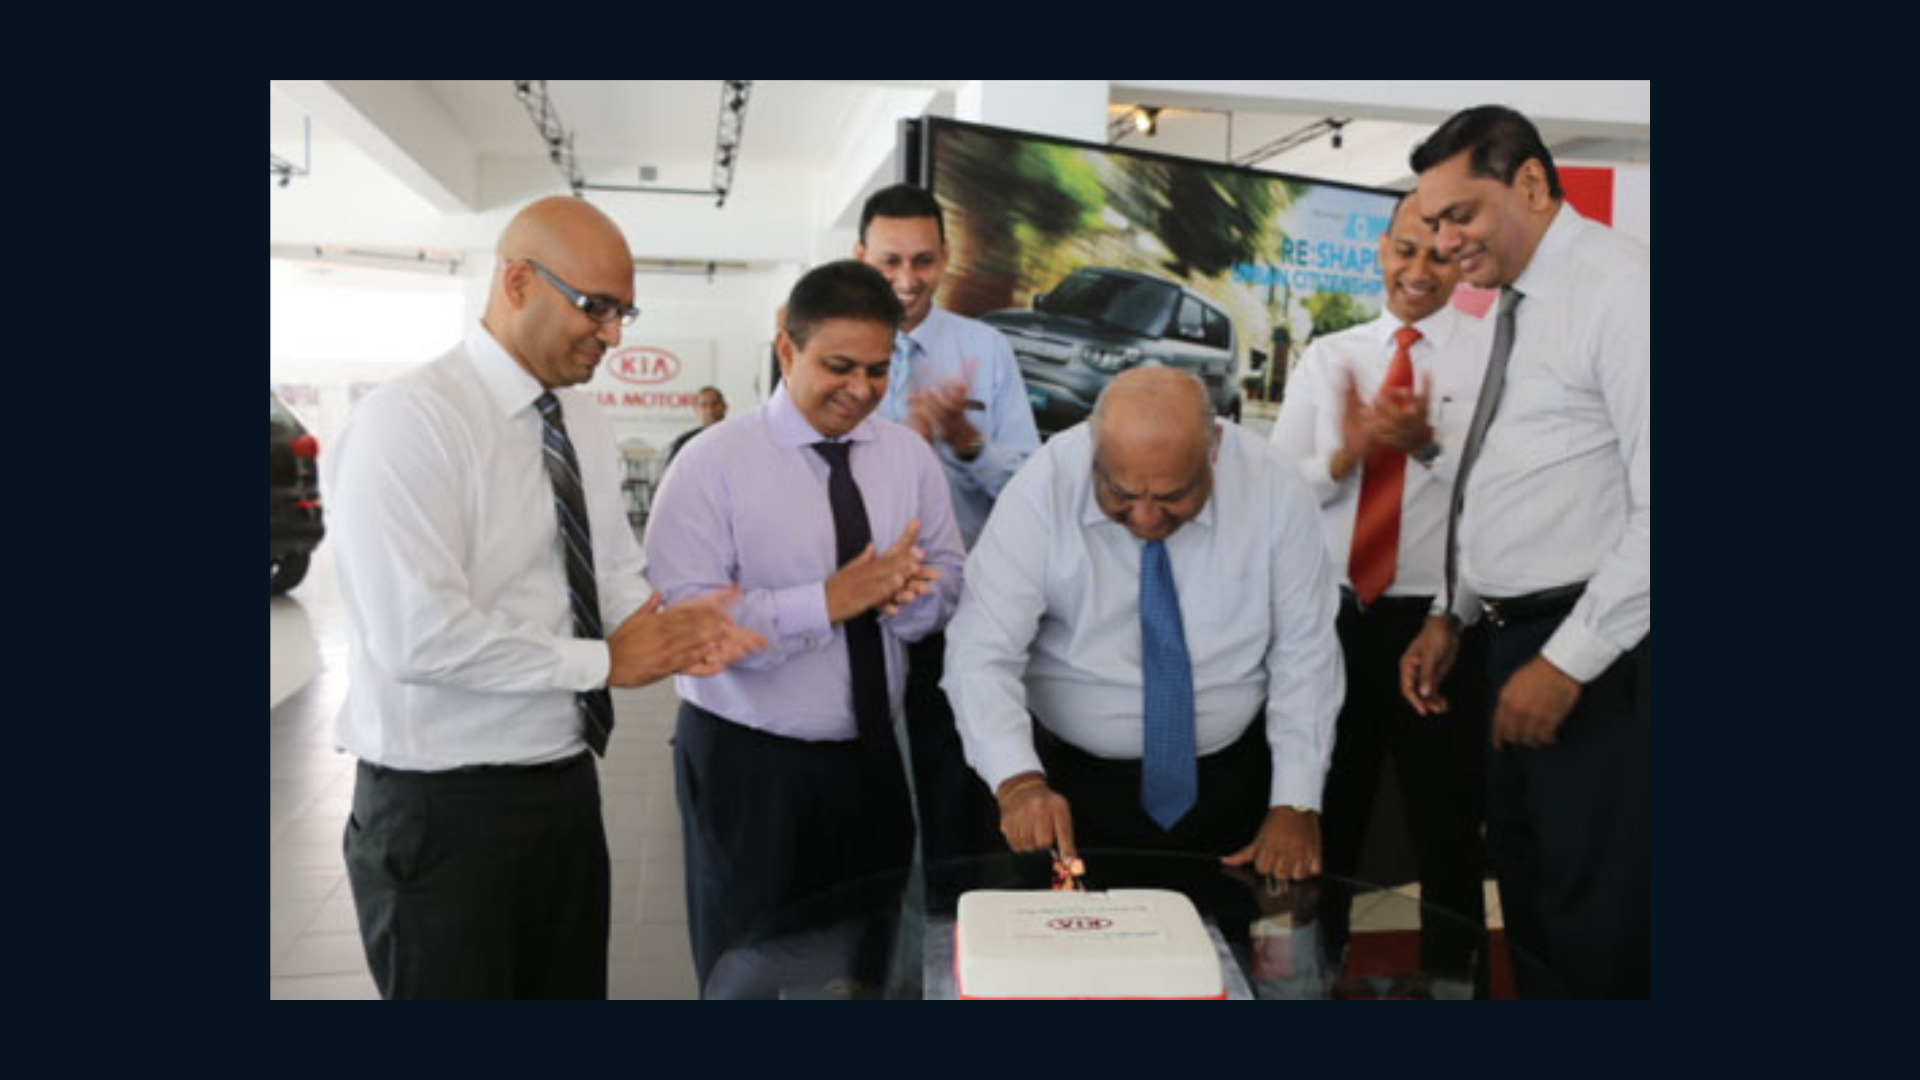 Mr. Mahen and other Kia employees cutting a cake